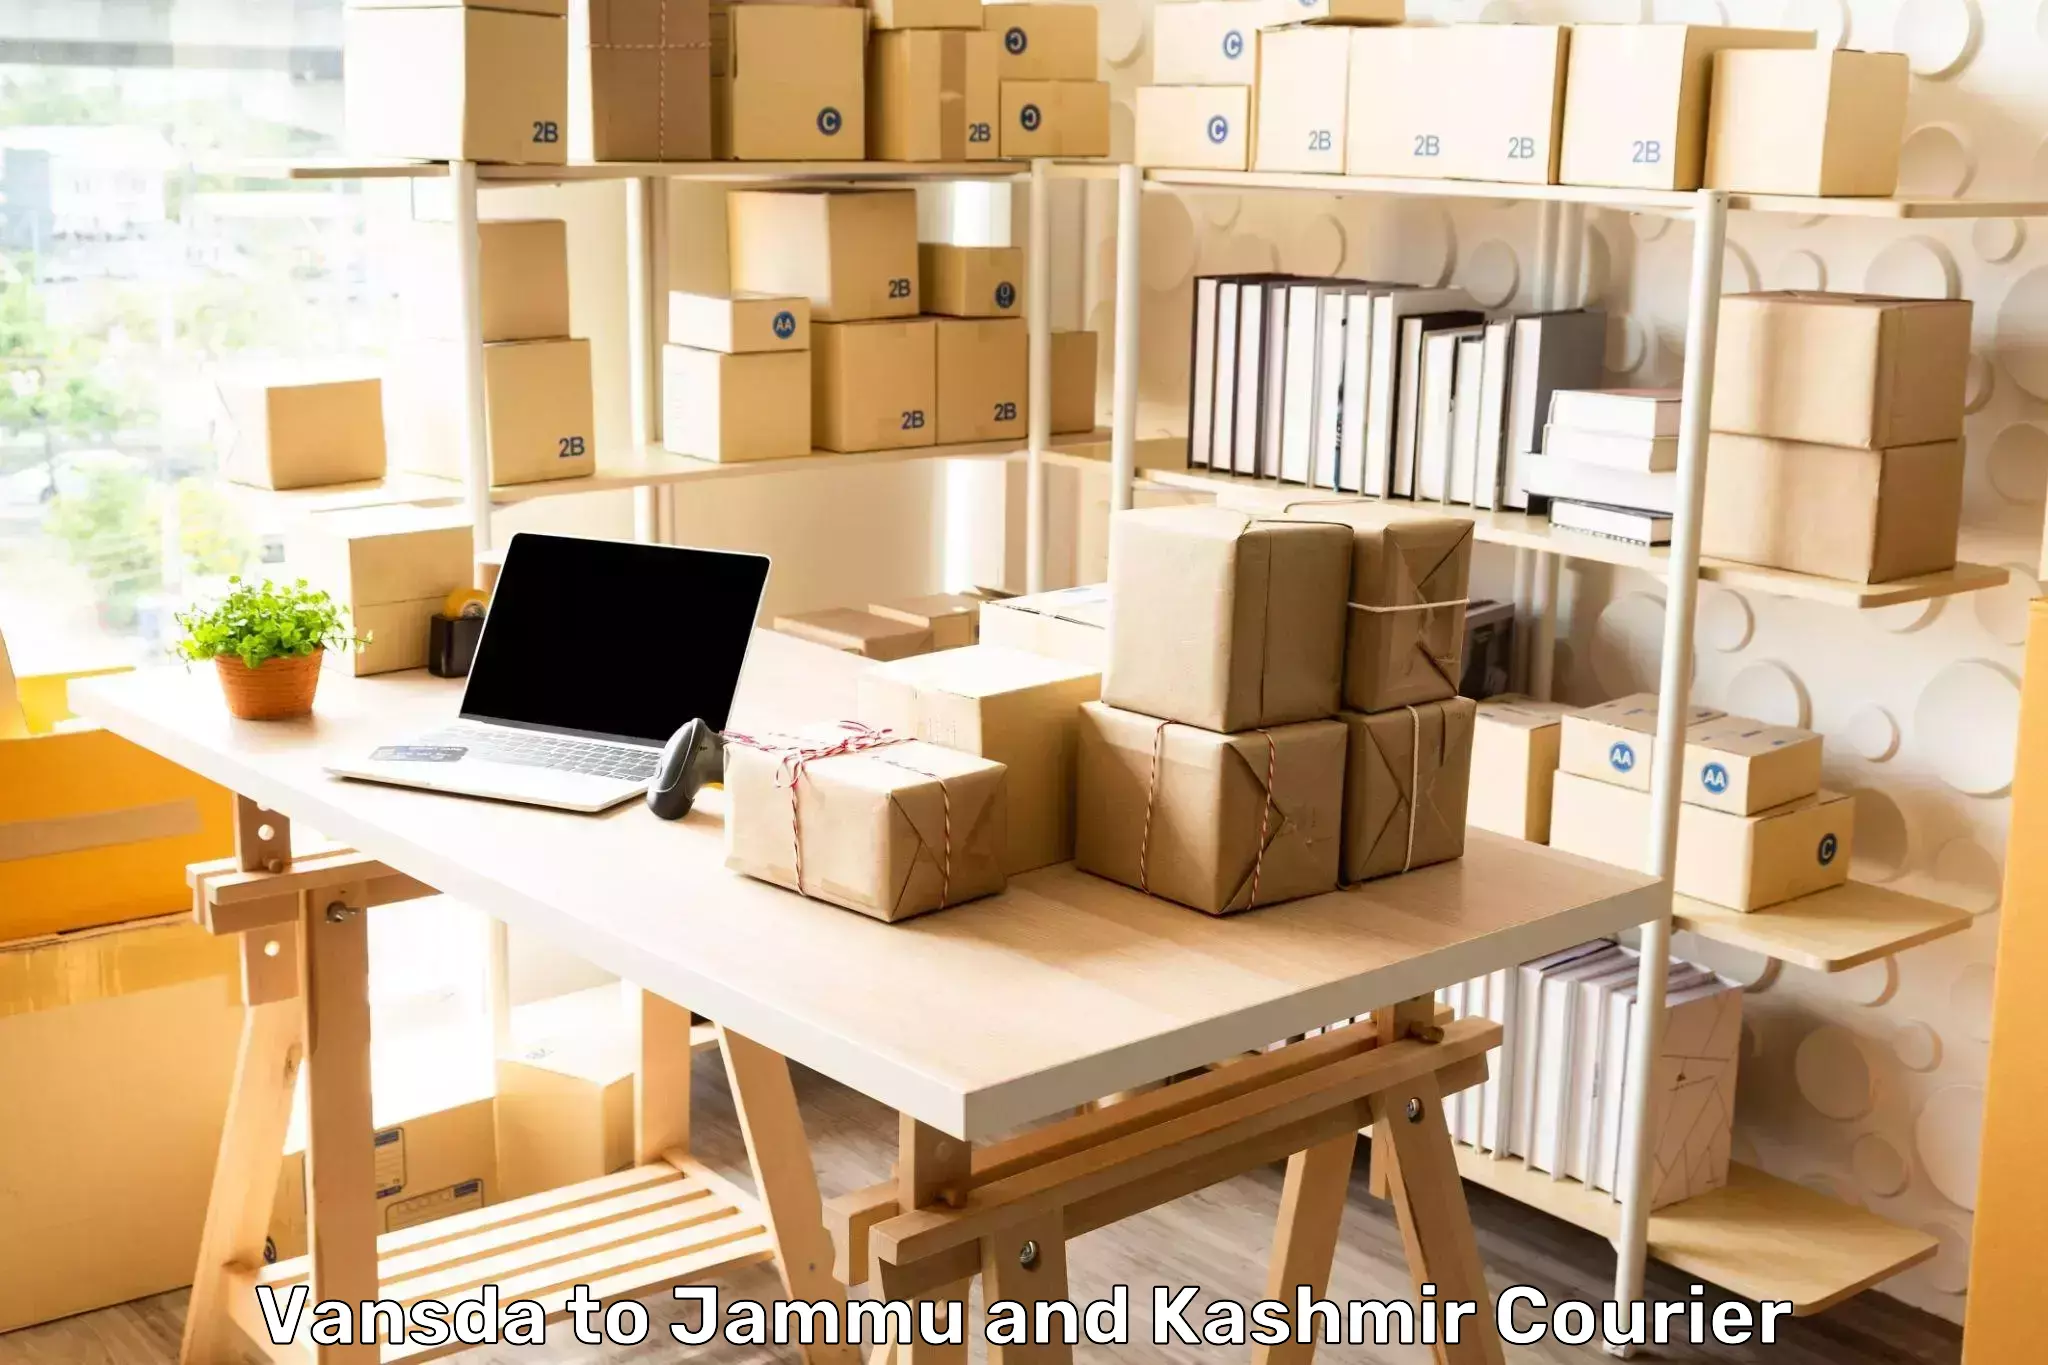 24-hour delivery options Vansda to Jammu and Kashmir